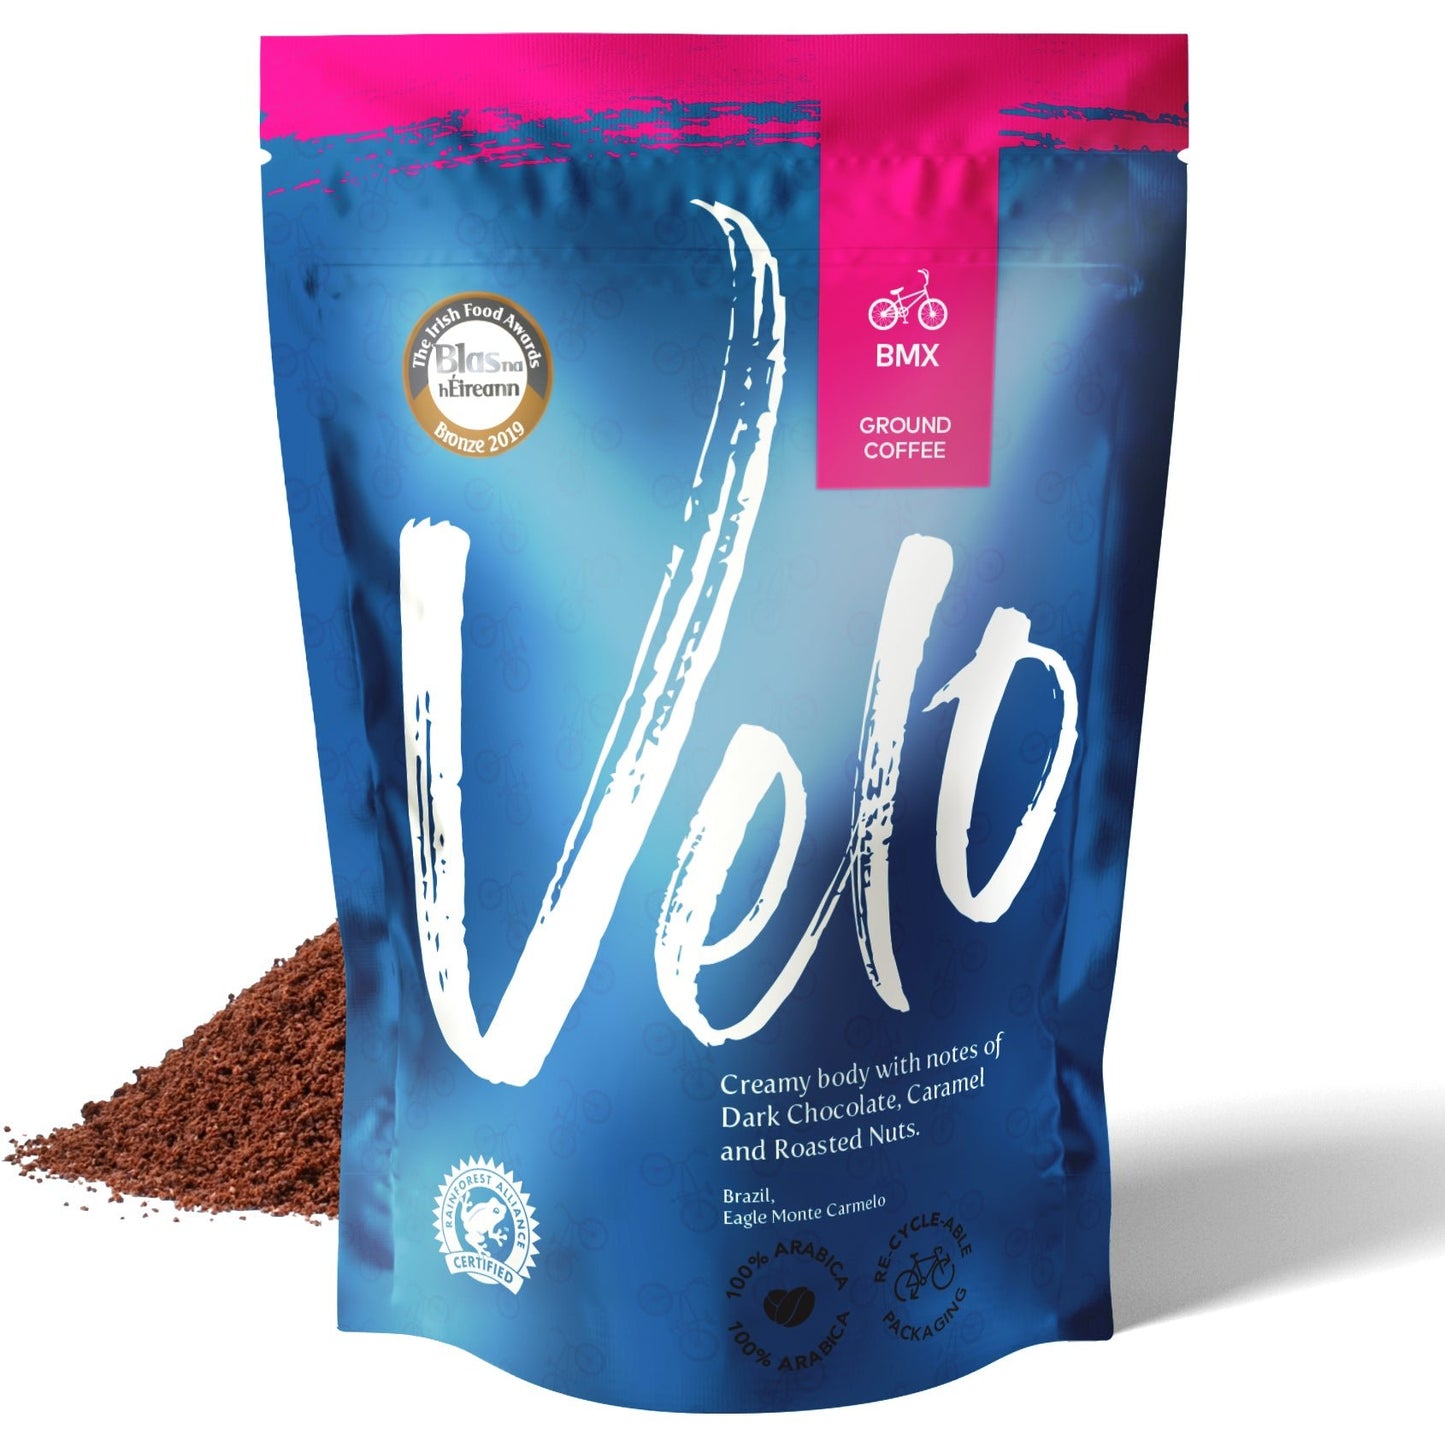 BMX 200g Brazil Coffee - Blue and Pink Coffee Bag with White Velo Across the bag- Ground Coffee Velo Coffee Roasters